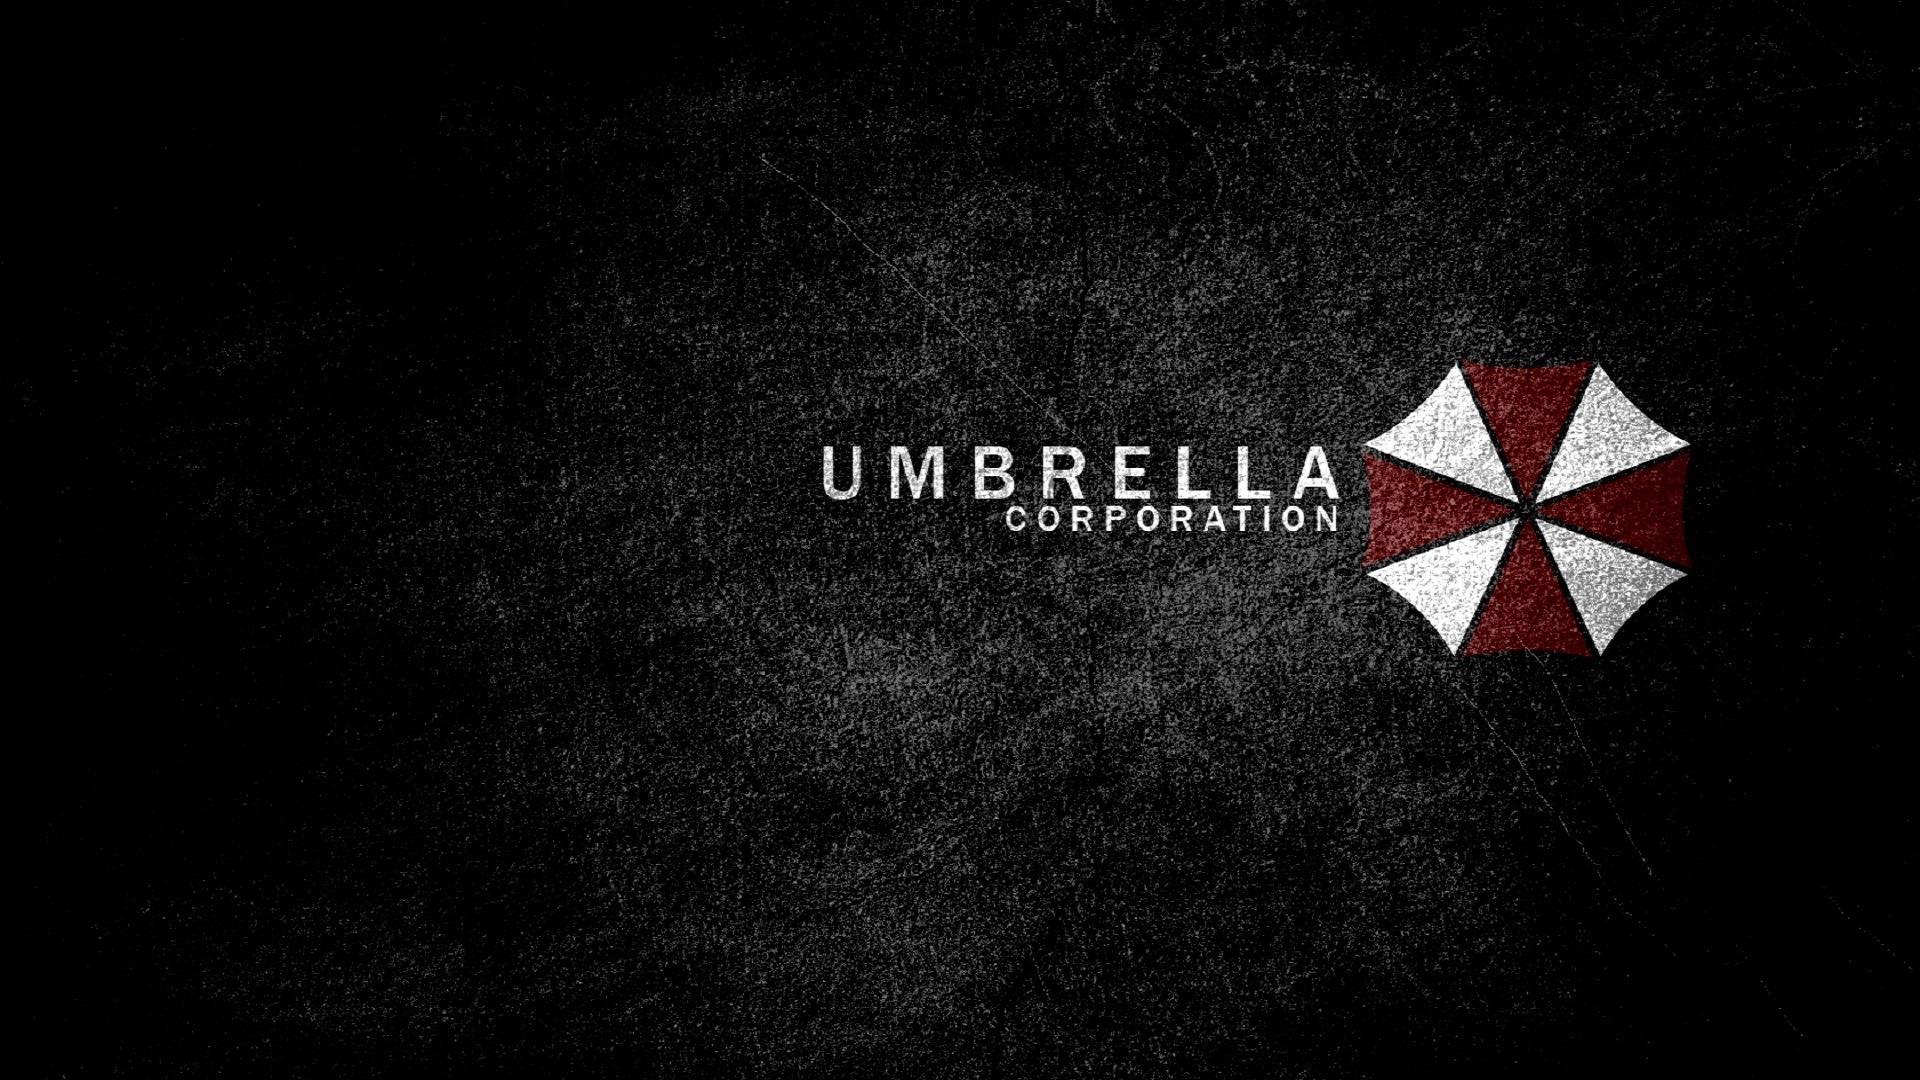 HD Resident Evil Corporation Wallpaper. Download Free